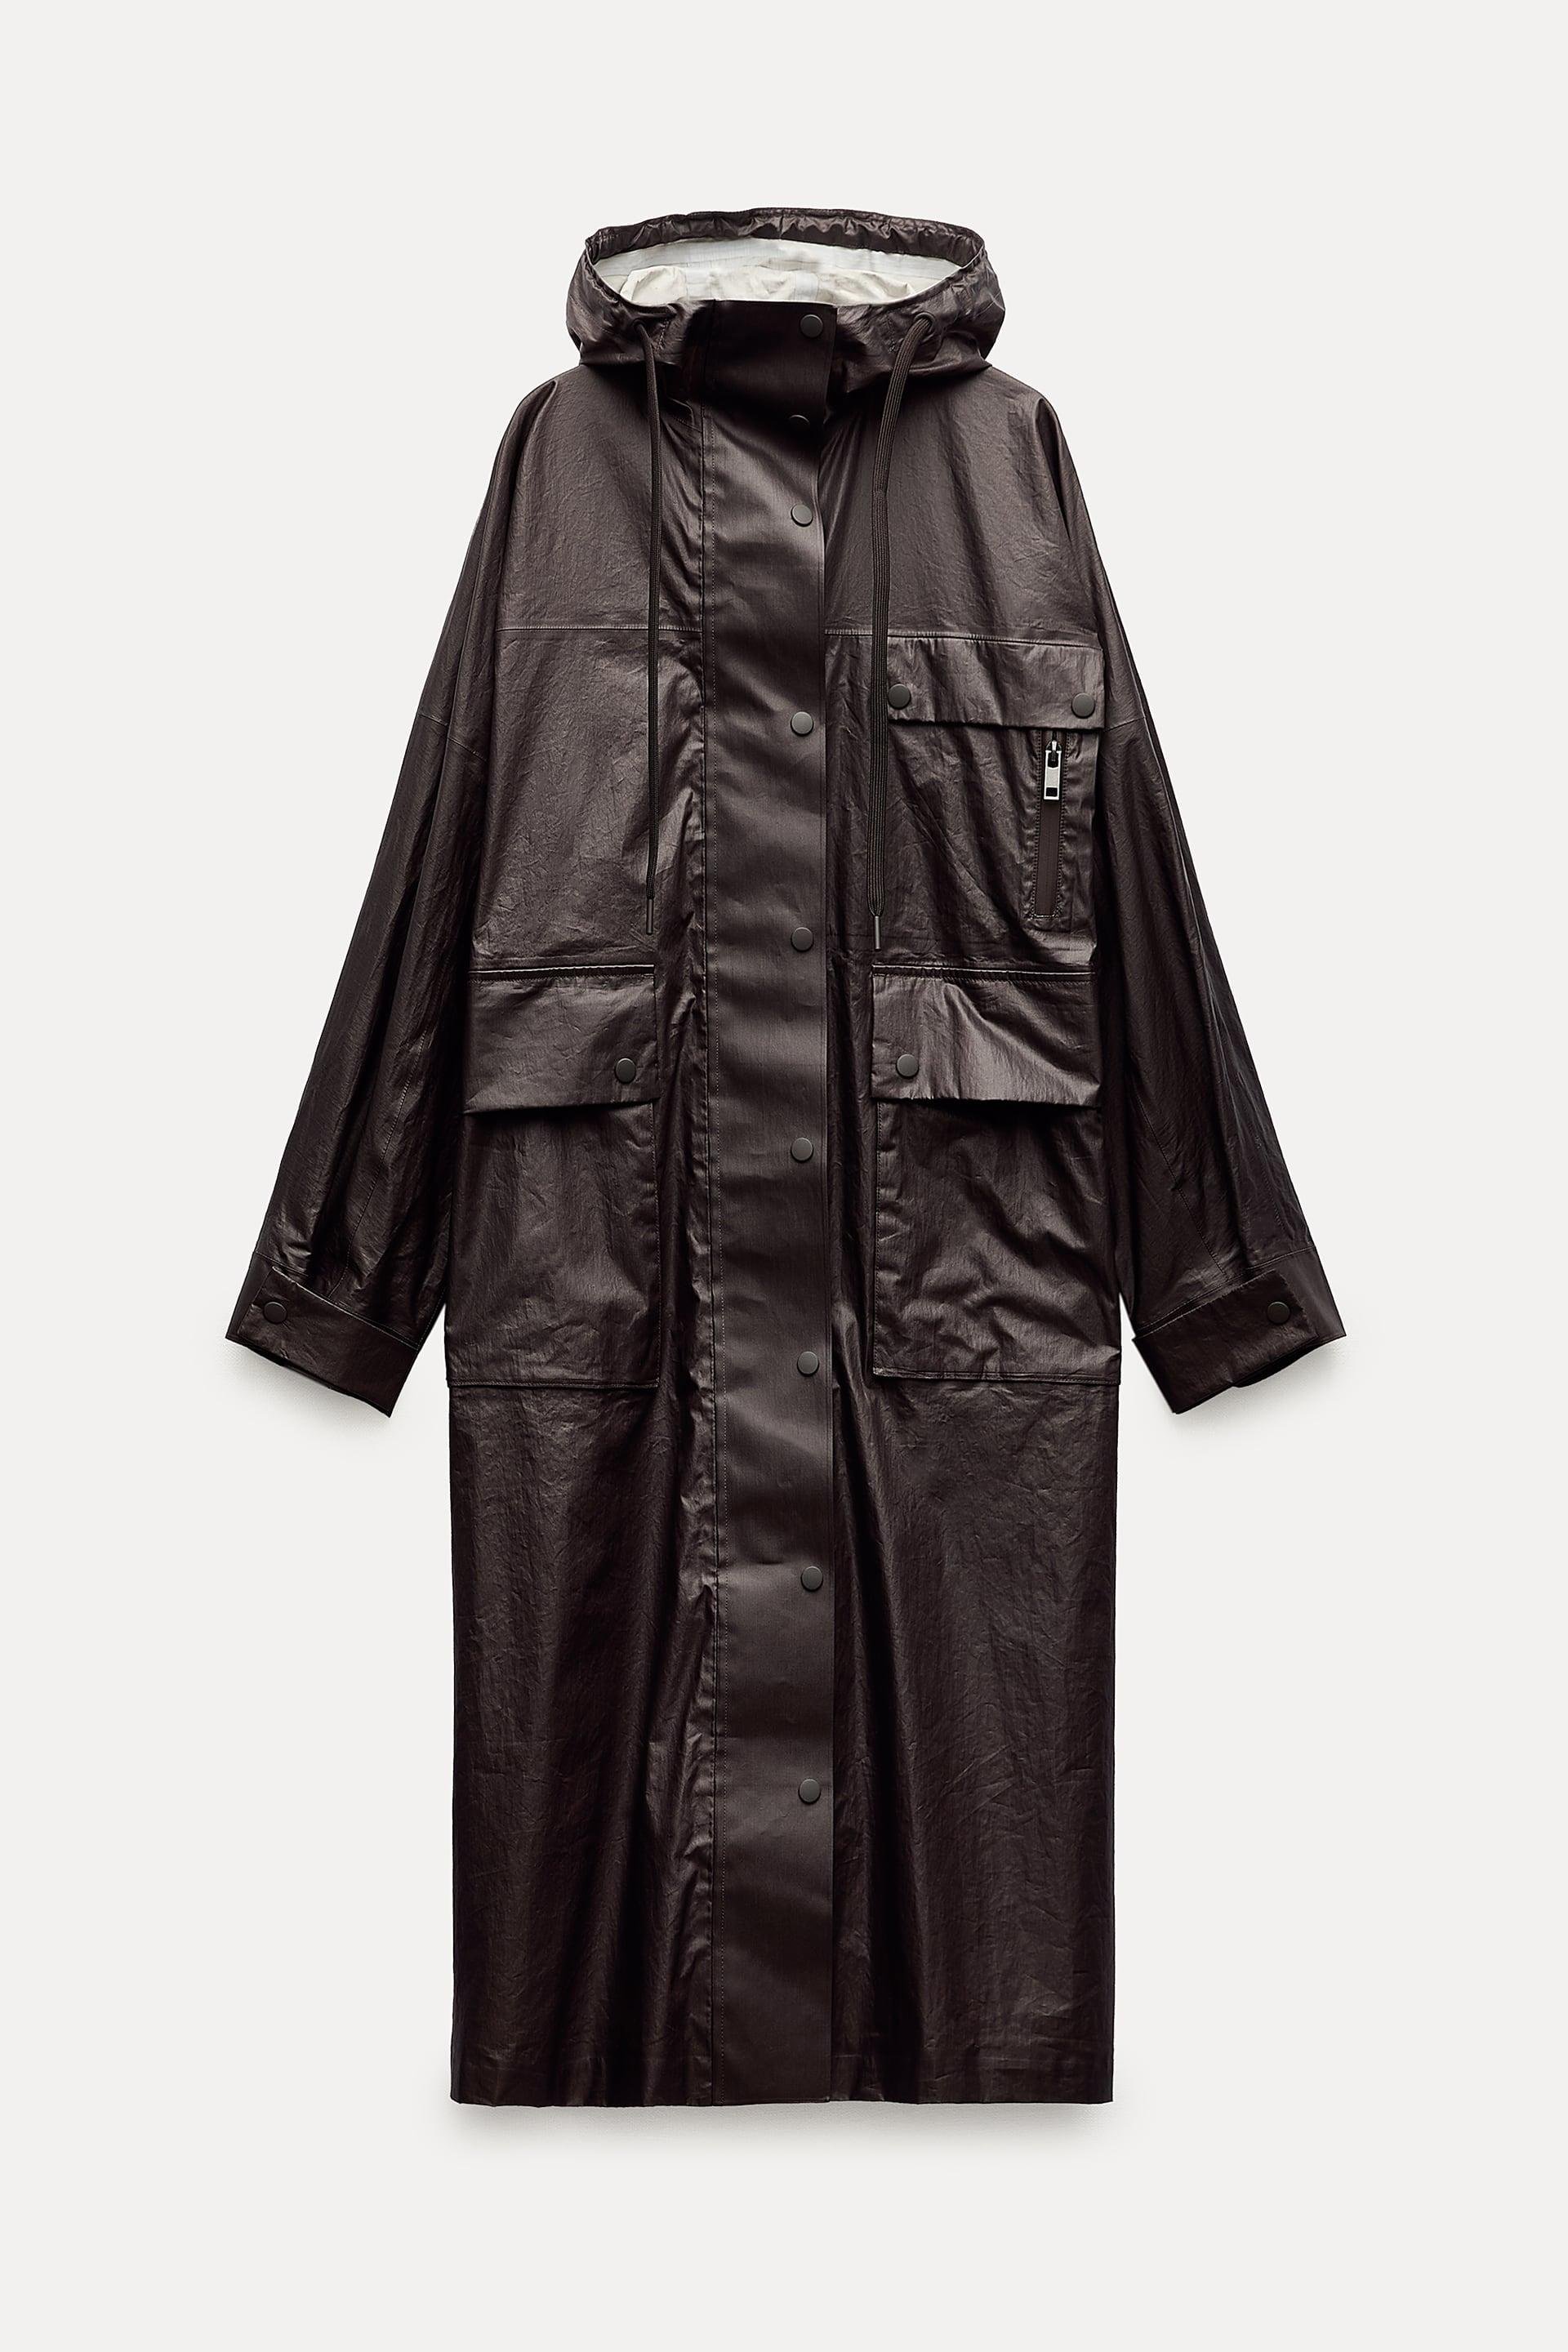 LONG JACKET ZW COLLECTION by ZARA